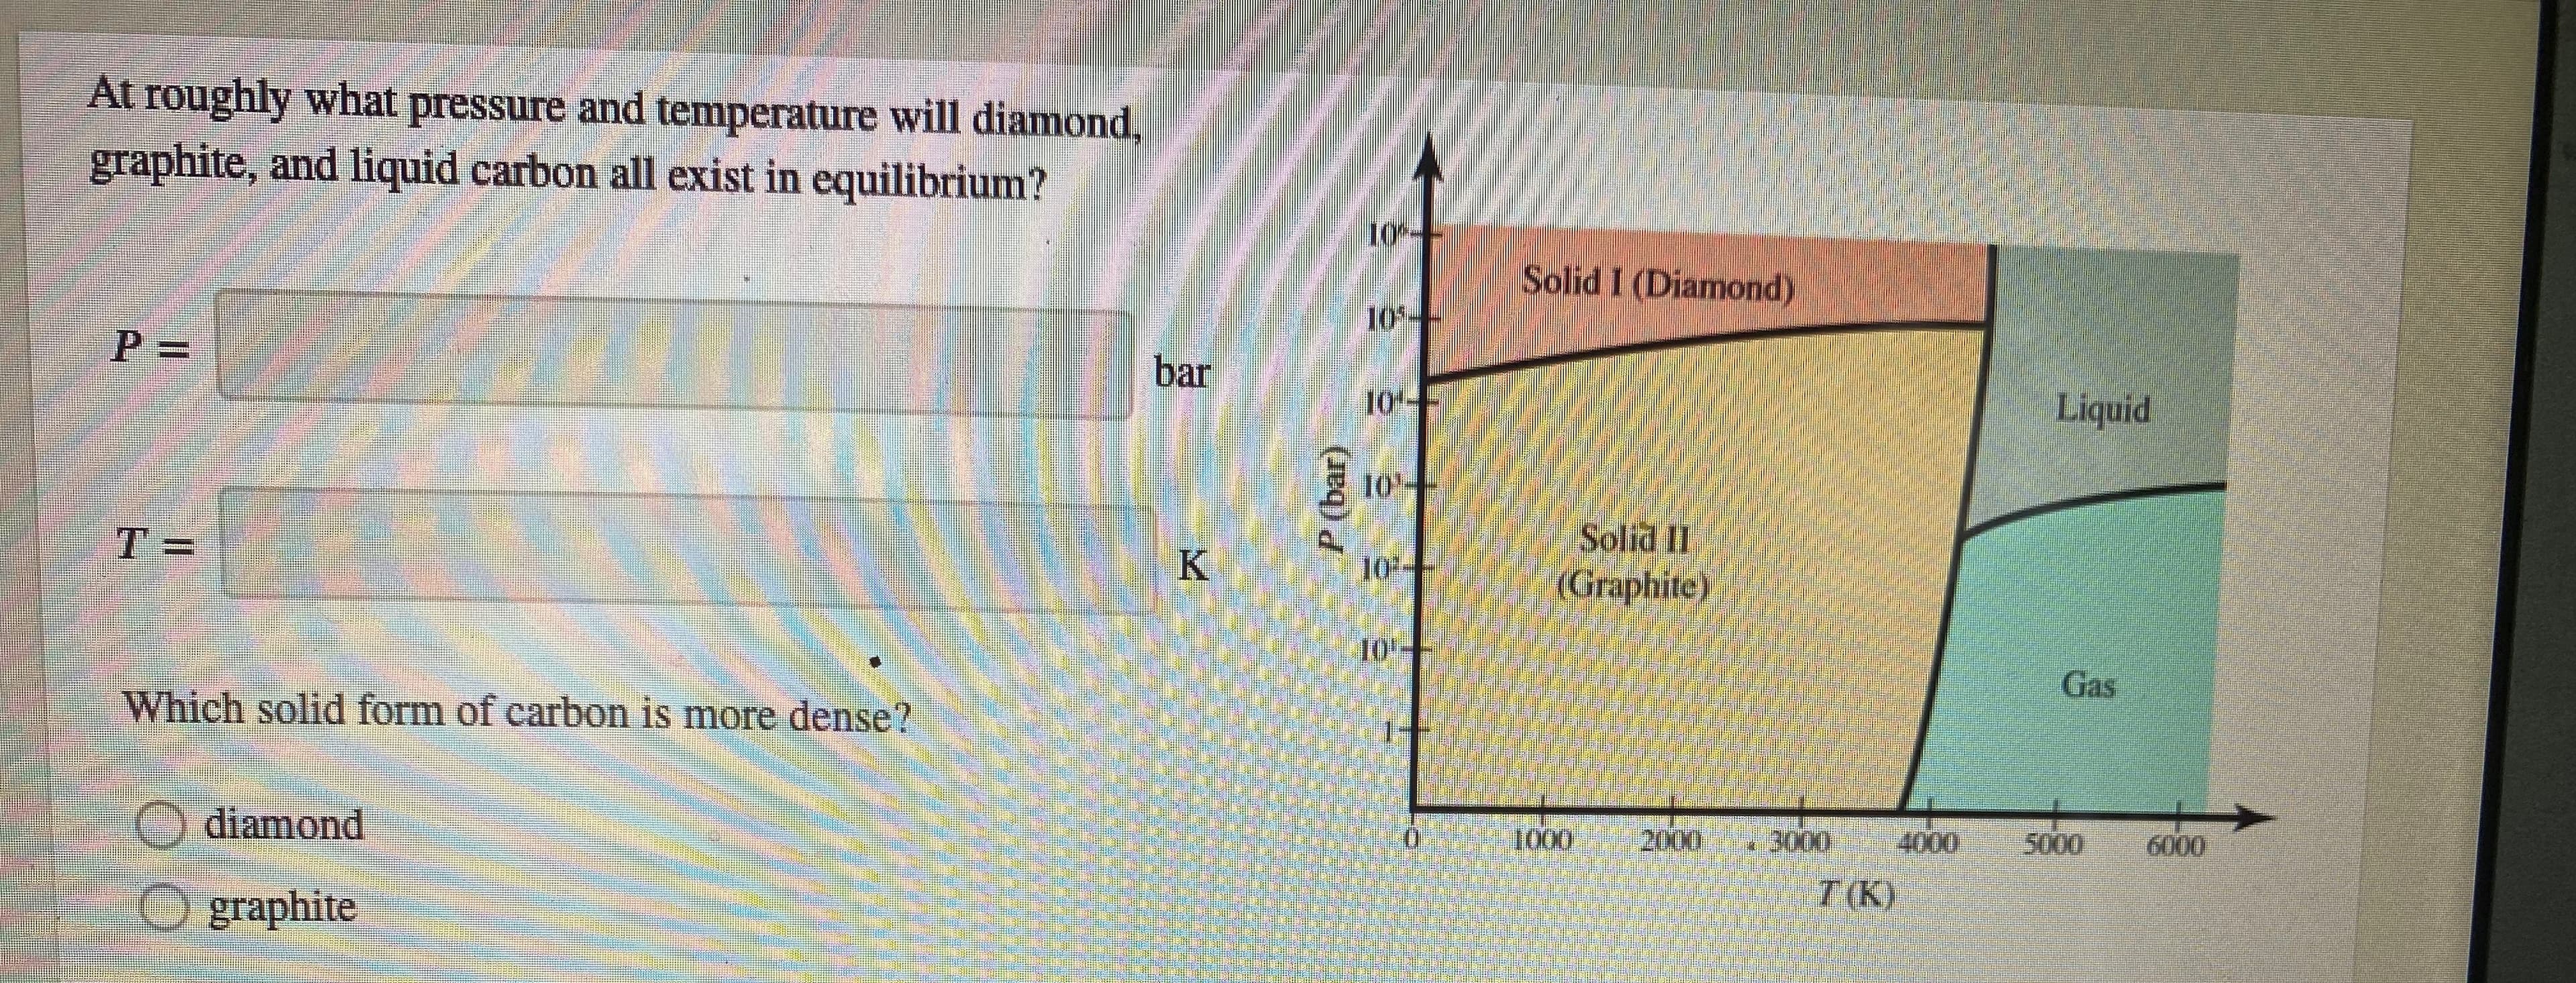 Arroughly what pressure antl temperanure will diamond.
graphite, and liquid carbon all exist in equilibrium?
Solid i Diamondy
bar
T=
Grapaile
Which solid form of carbon is mure dense?
diamond
graphite
